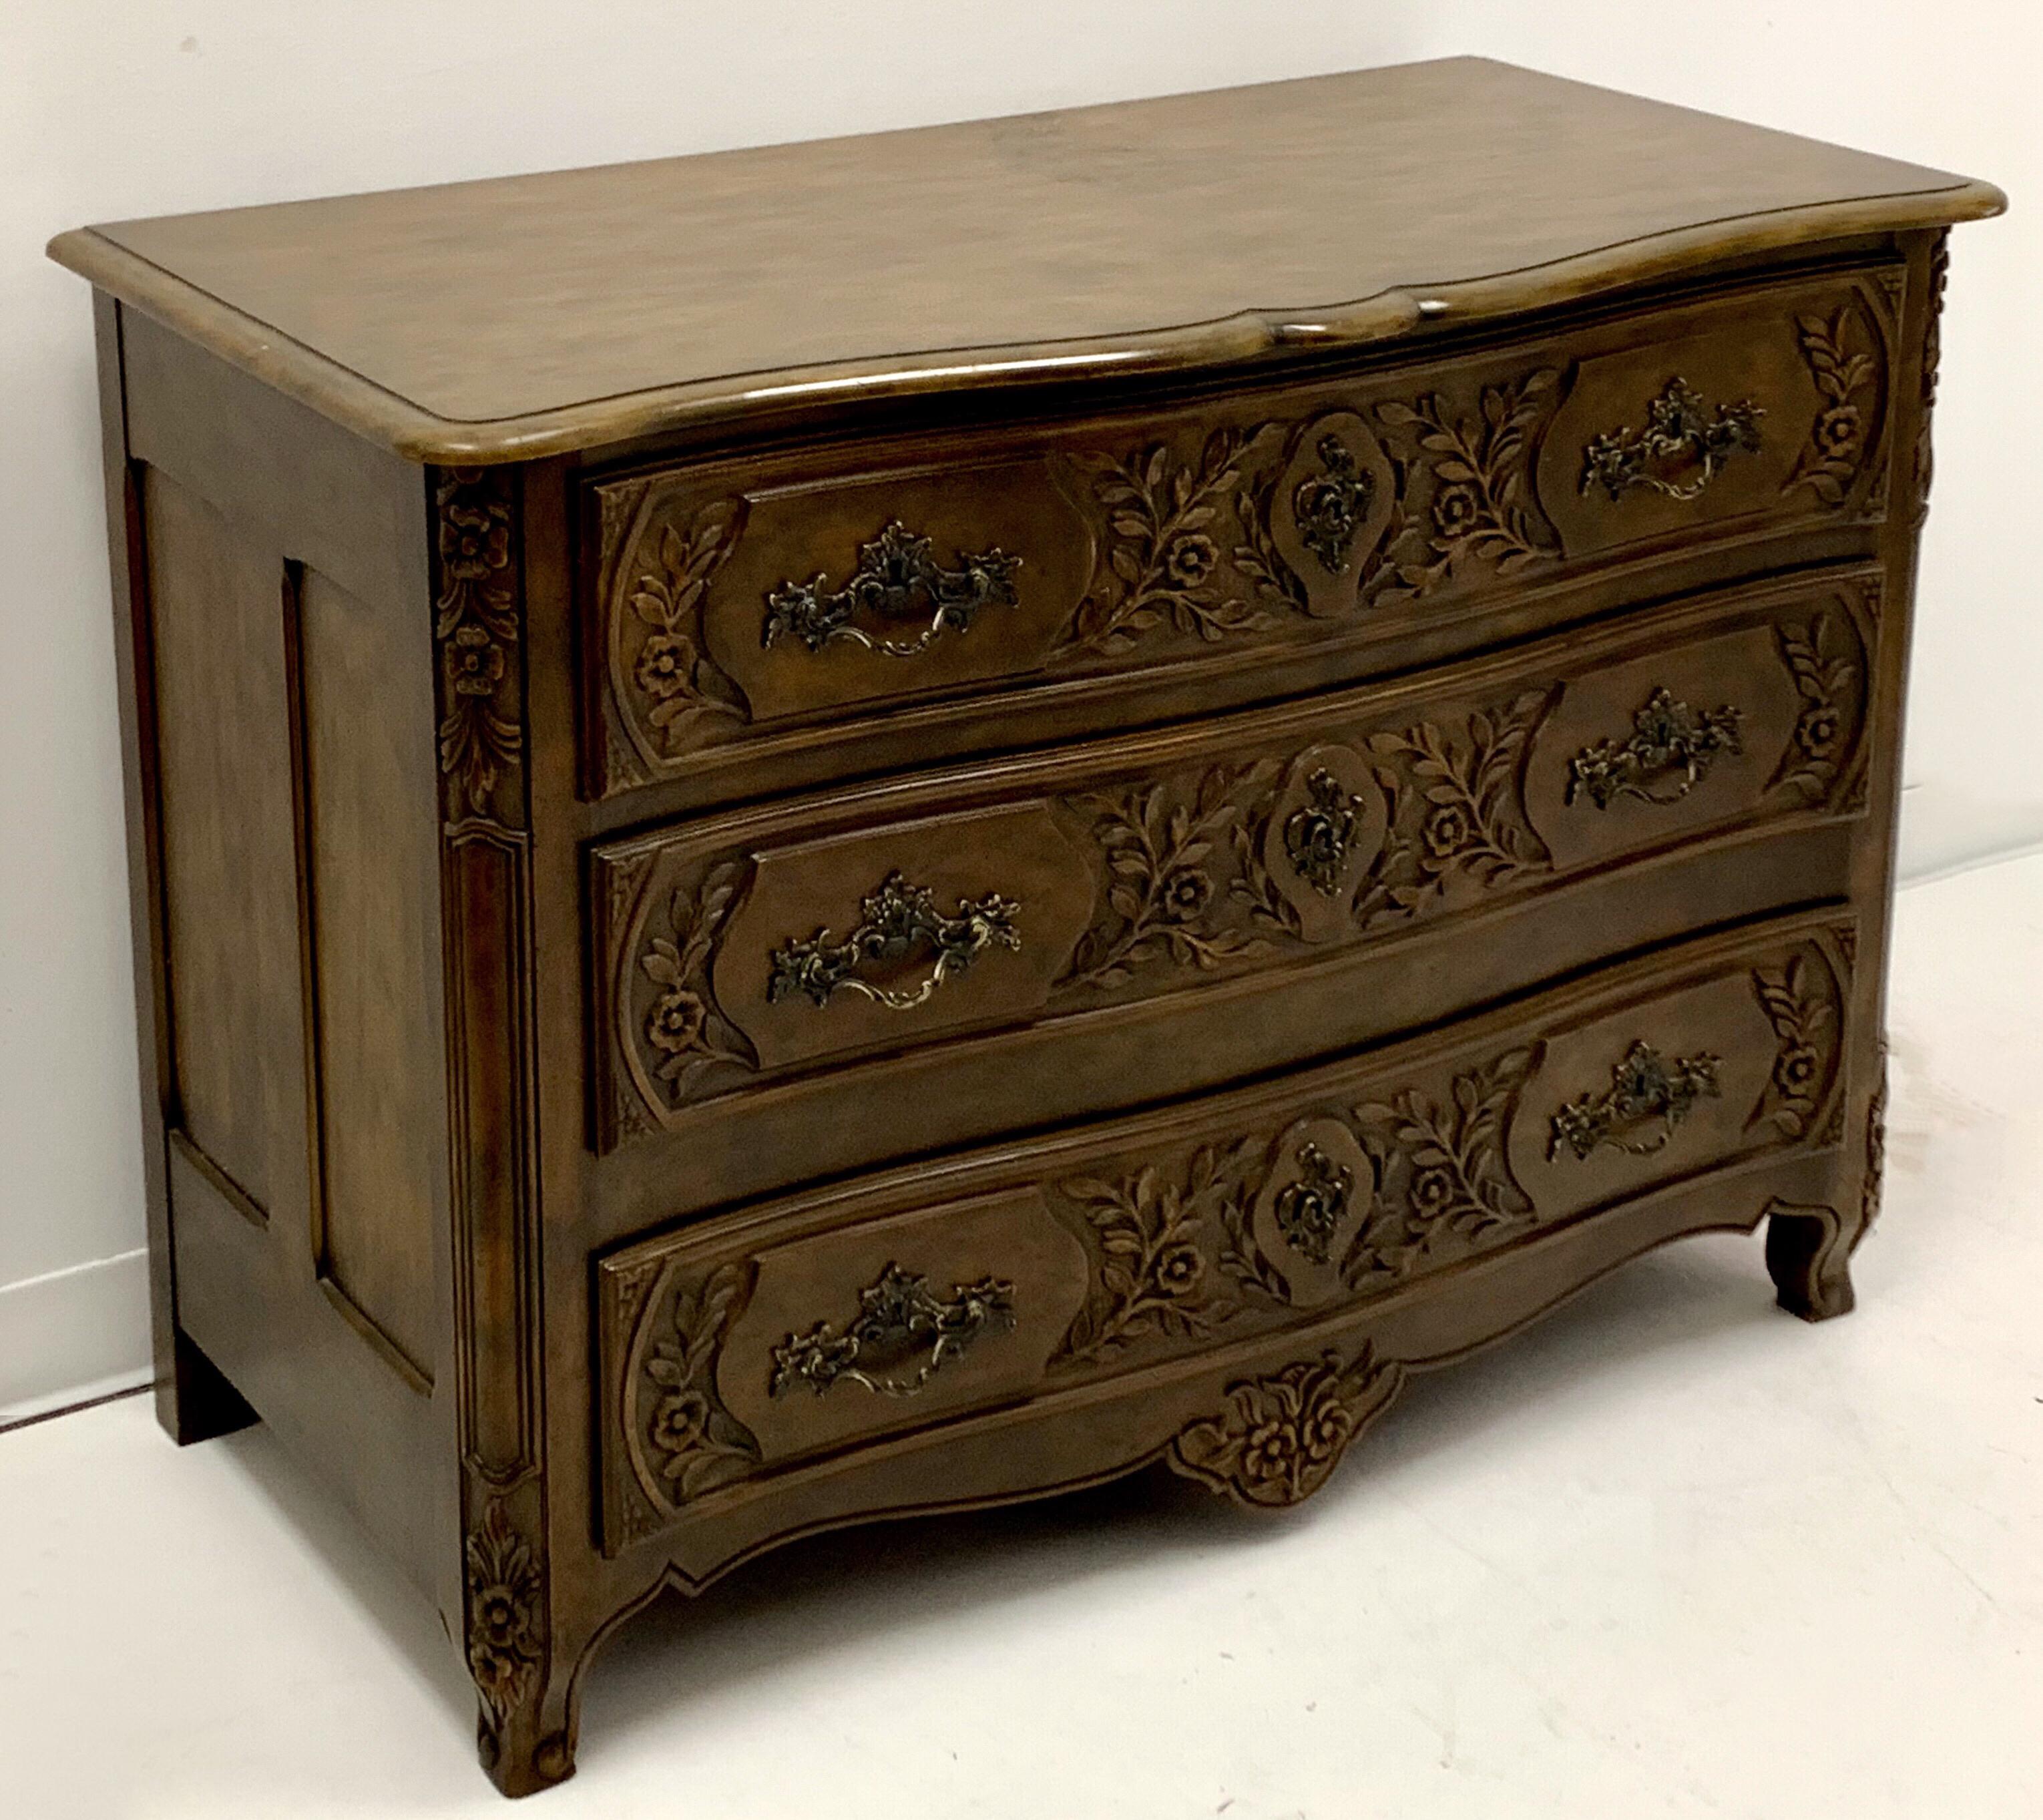 This is a Baker Furniture Company Collector’s Choice Louis XV commode. It is a copy of an 18th century piece. It is number 4057 and a limited release piece. It is marked and in very good condition.